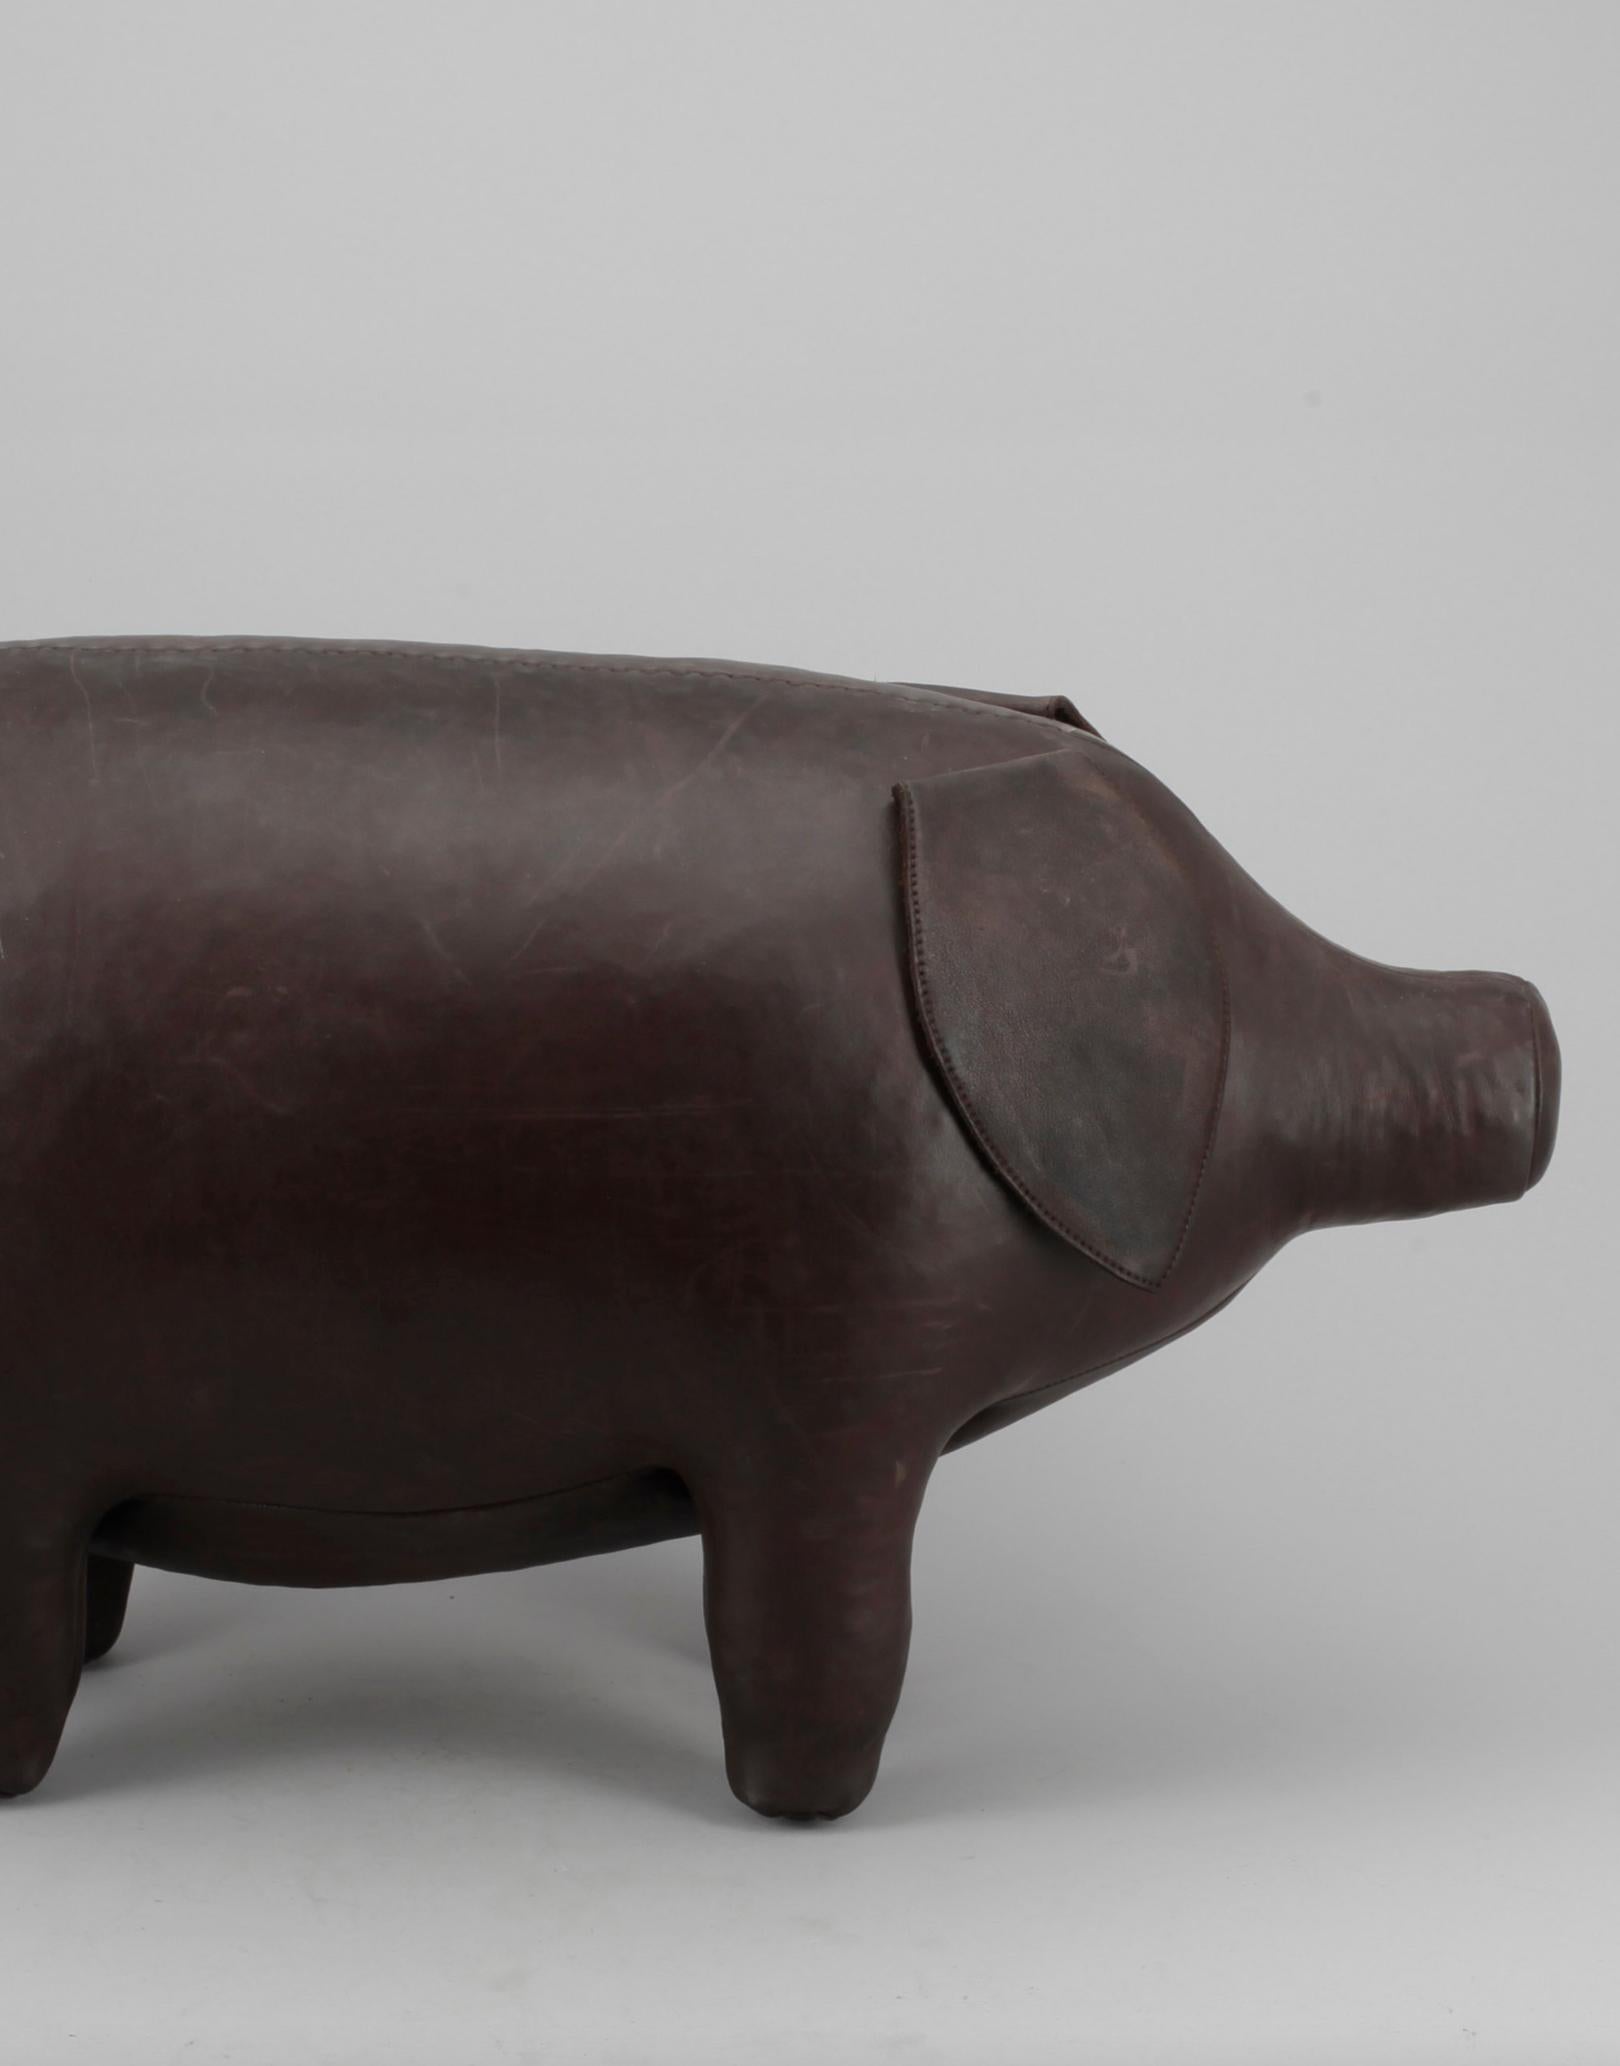 Very nice Pig by Dimitri Omersa & Co in leather for Abercrombie England 1980
Good condition.